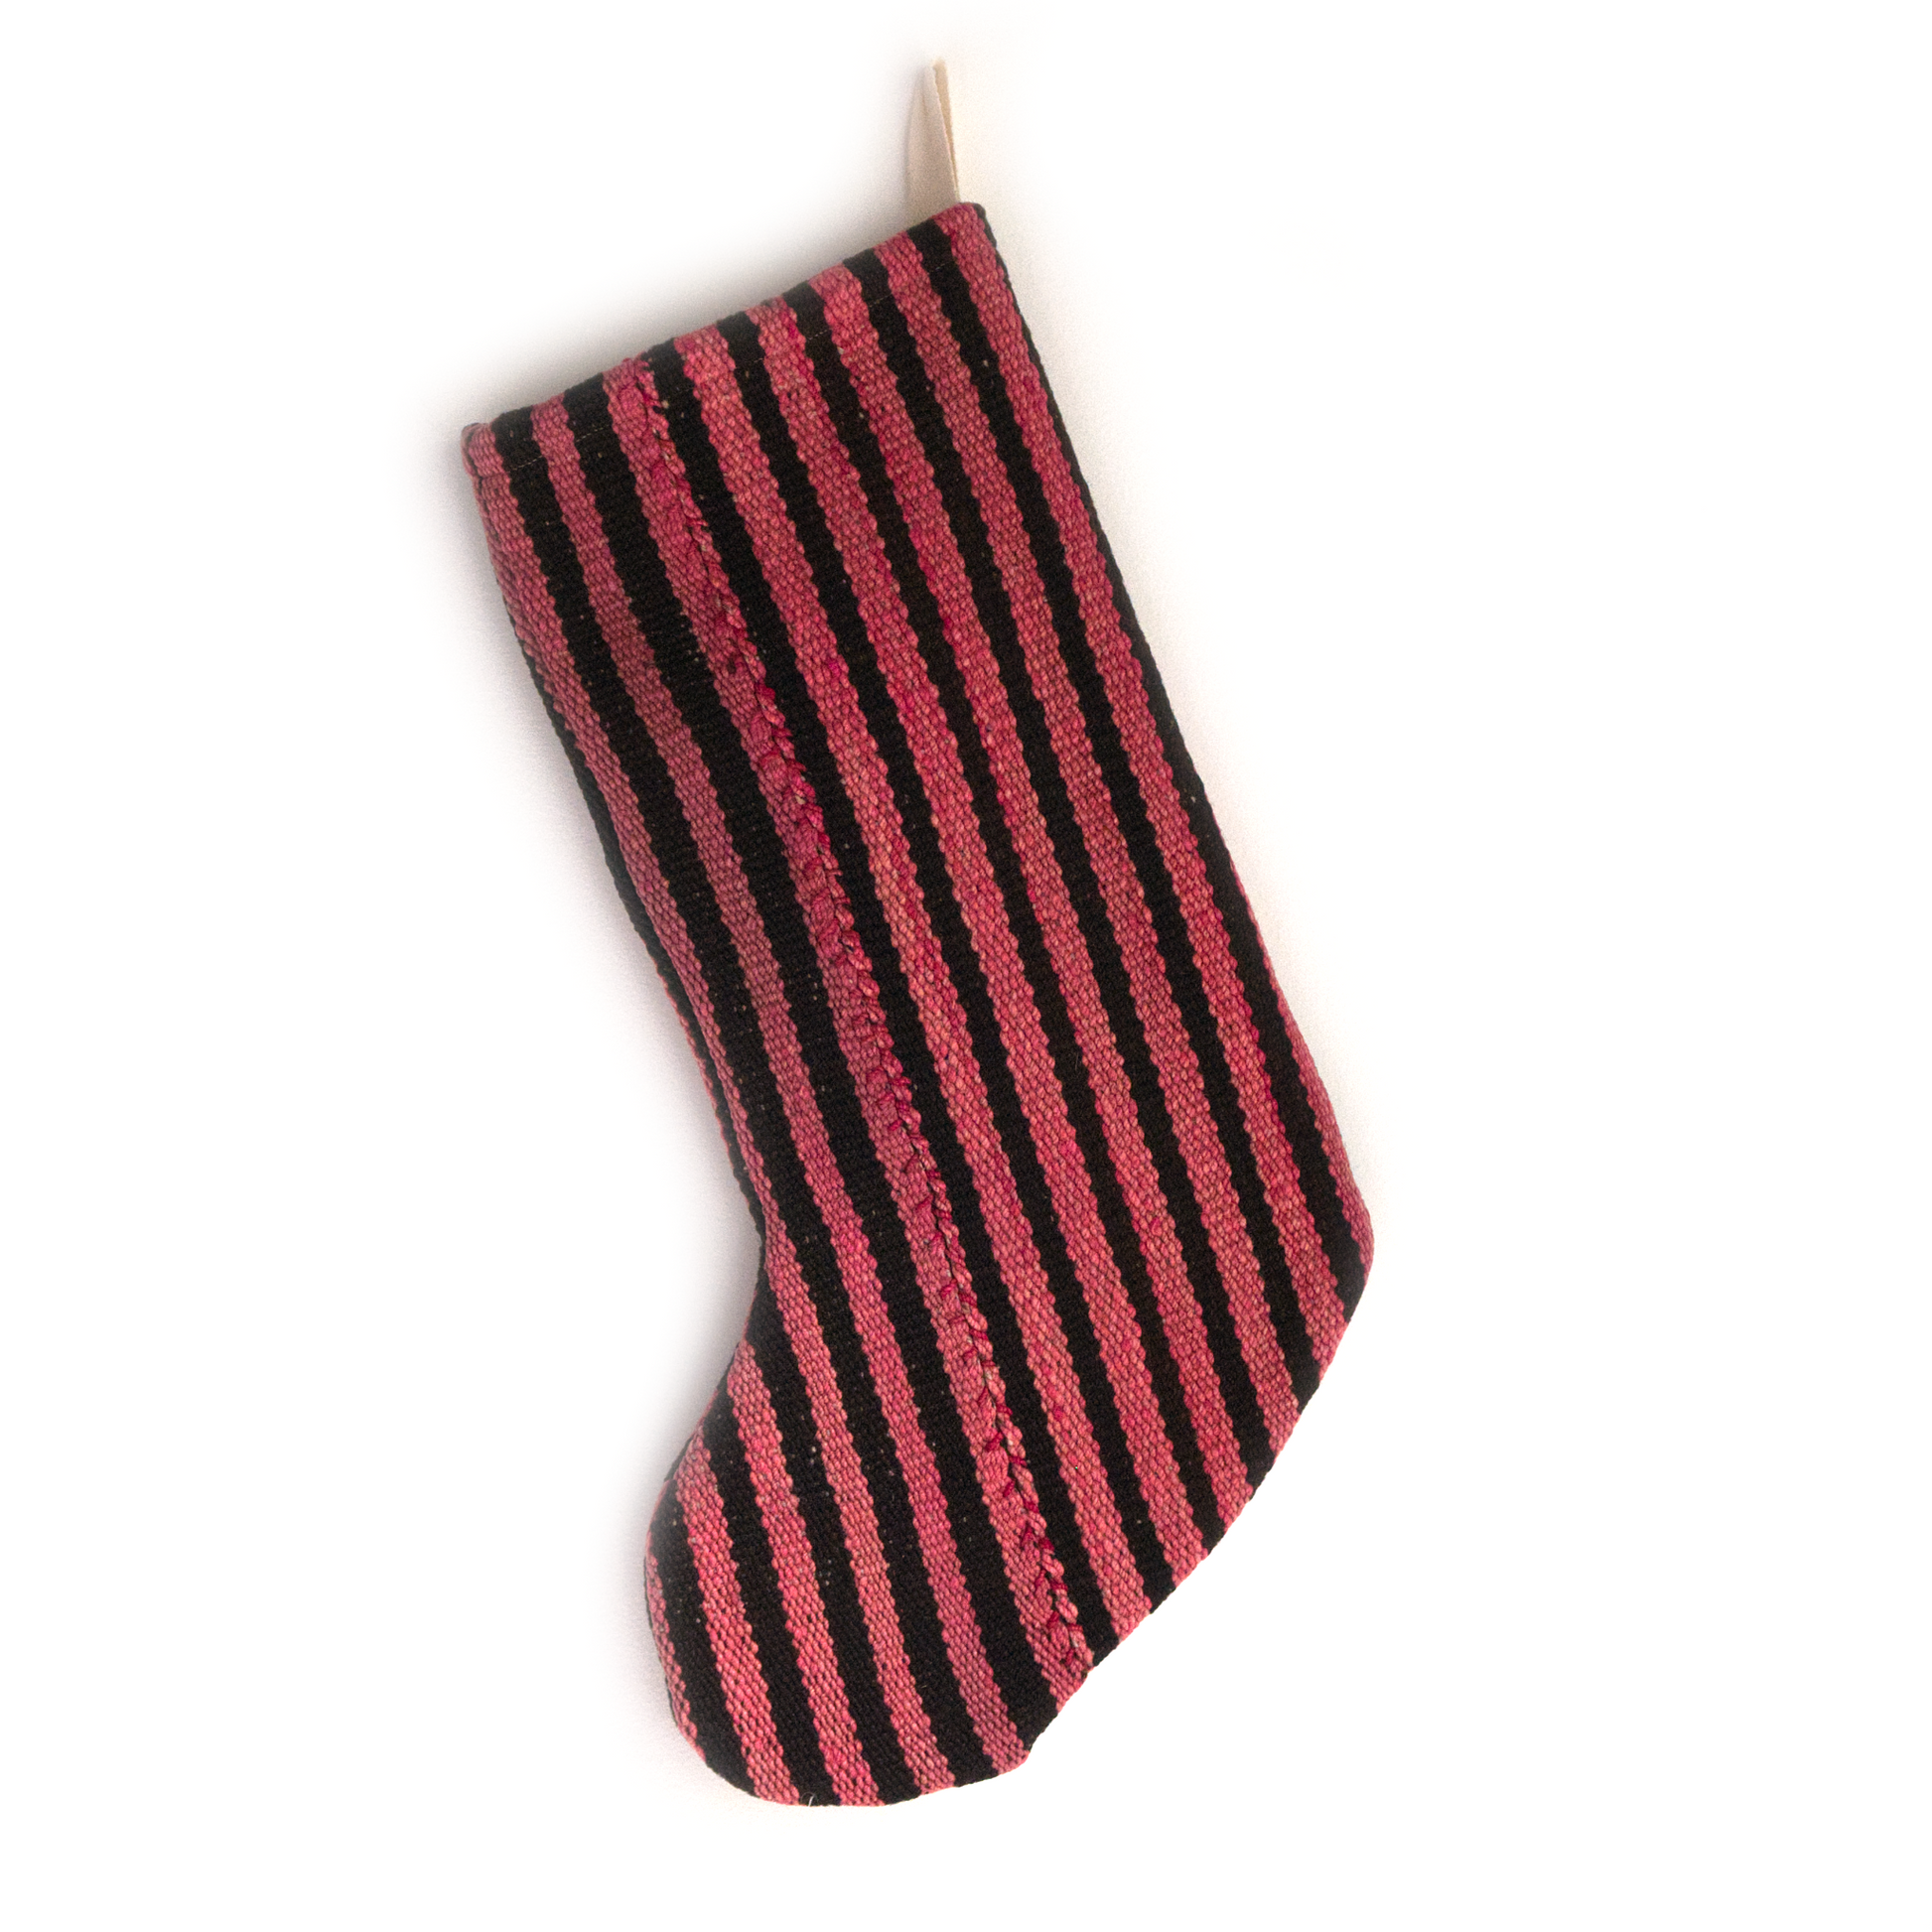 Intiearth_Peruvian_Frazada_Christmas_Stocking_no_10_multicolor_bright_and_colorful_one_of_a_kind.png